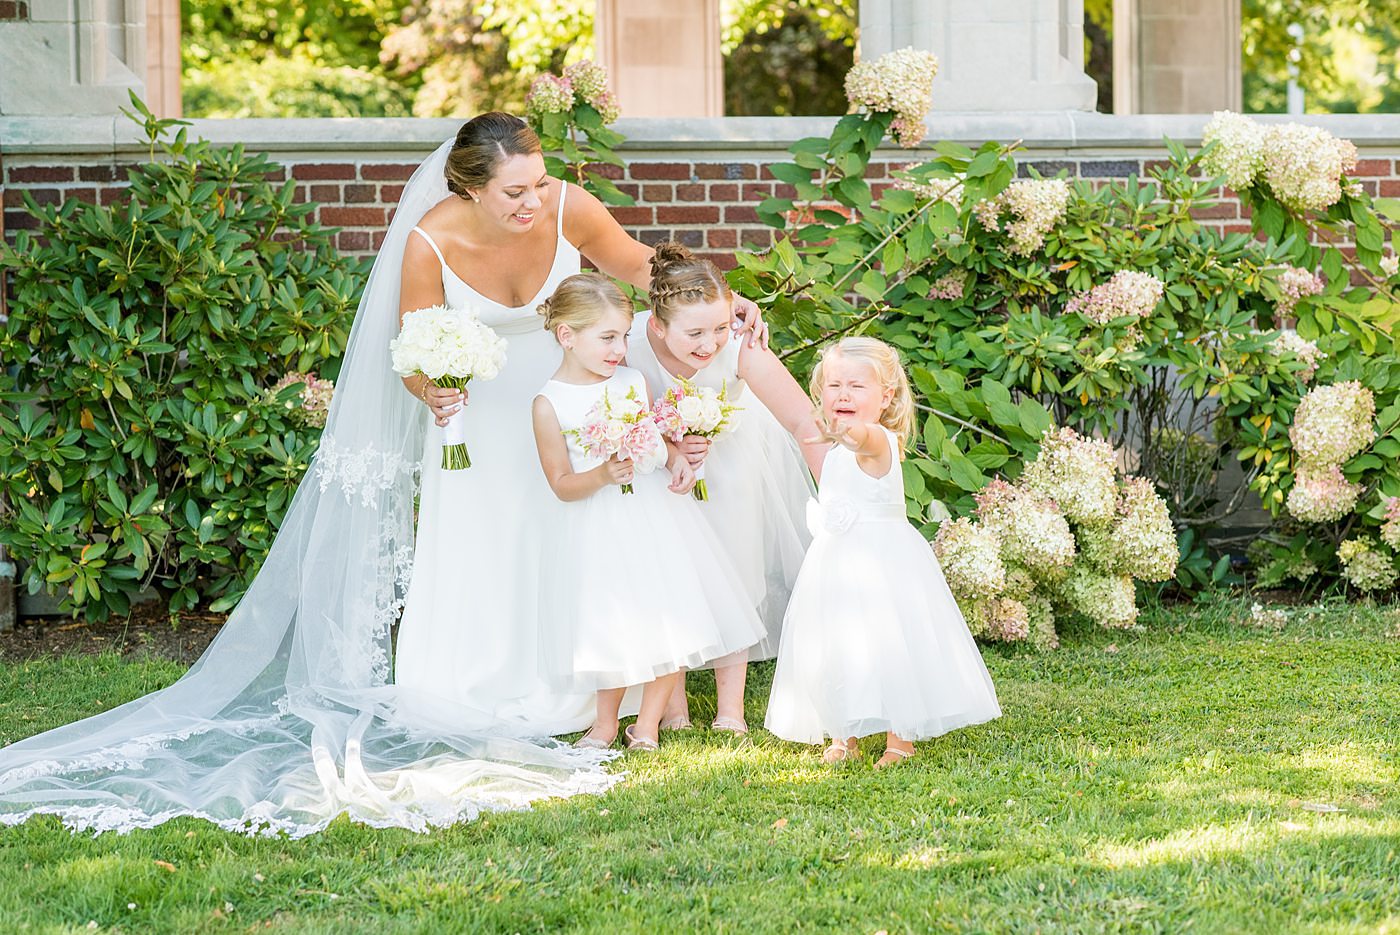 Photos by Mikkel Paige Photography at Waveny House wedding venue in New Canaan, Connecticut. This beautiful venue has an outdoor garden for the ceremony and indoor historic home for the reception. The bride and groom took photos outside with their flower girls. #mikkelpaige #wavenyhouse #wavenyhousewedding #connecticutweddingvenue #connecticutweddingphotographer #bridalparty #flowergirls